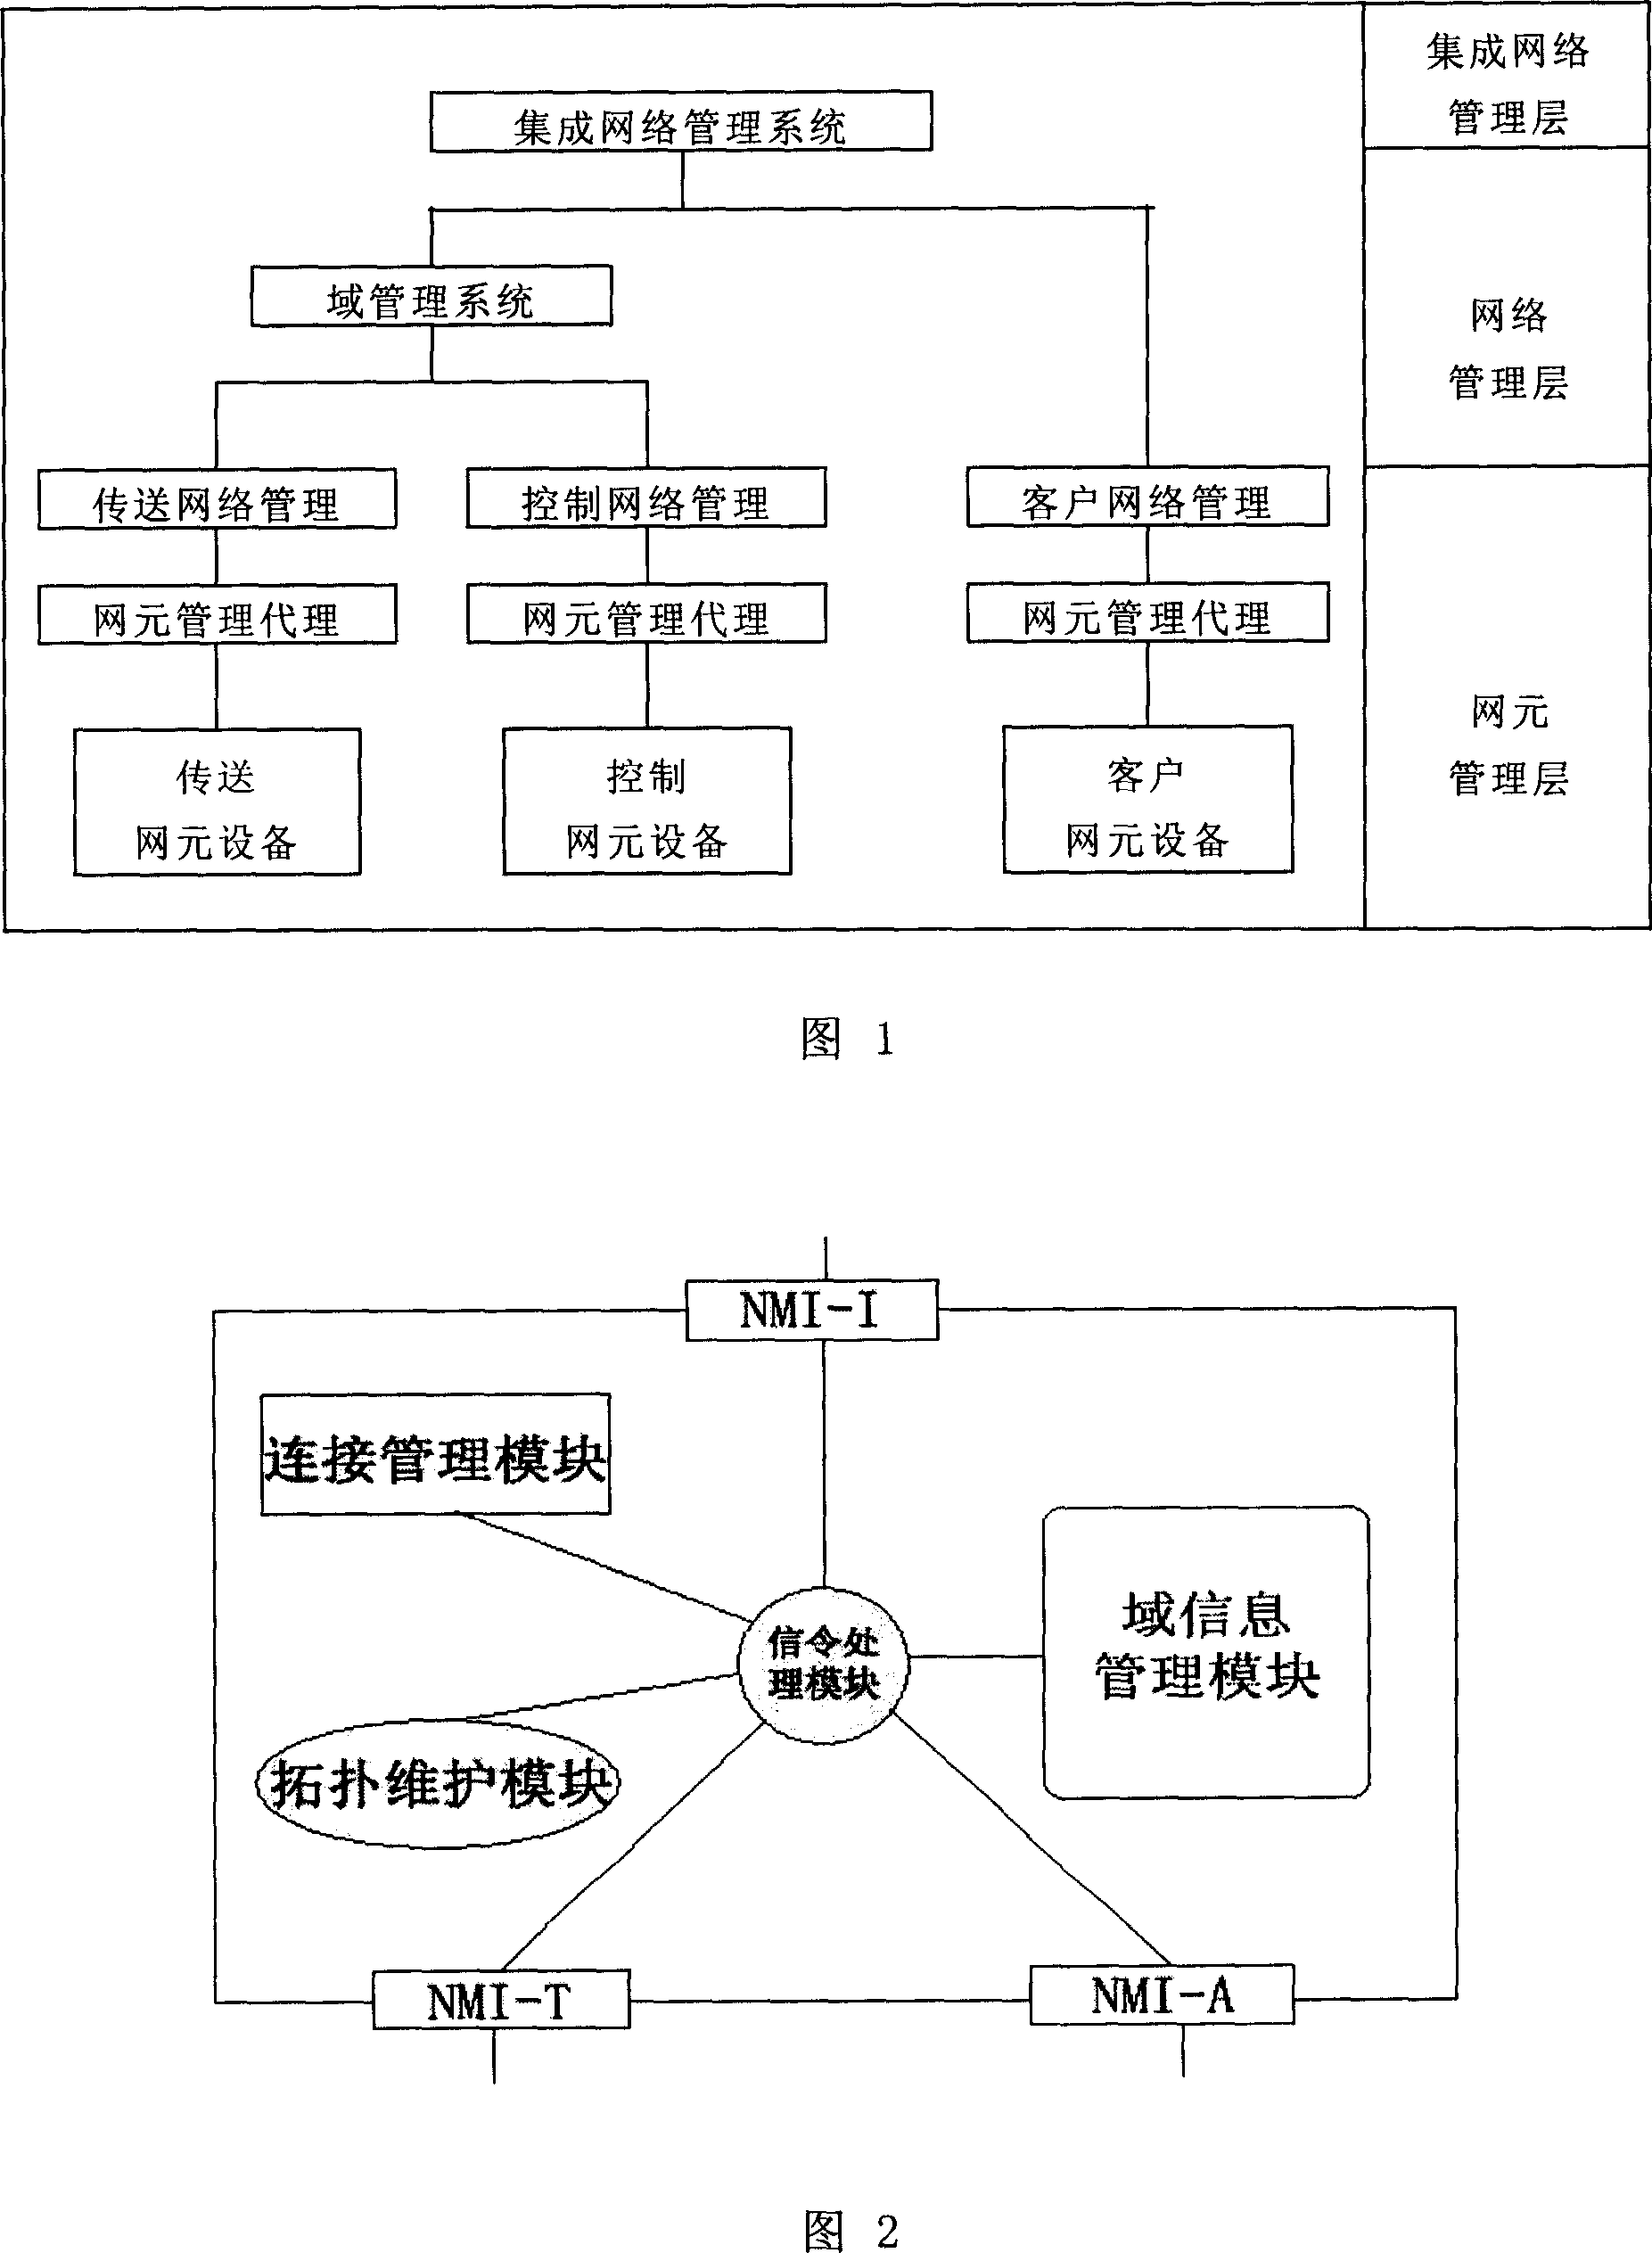 Automatic switched optical network management system and management method for layered routing mechanism